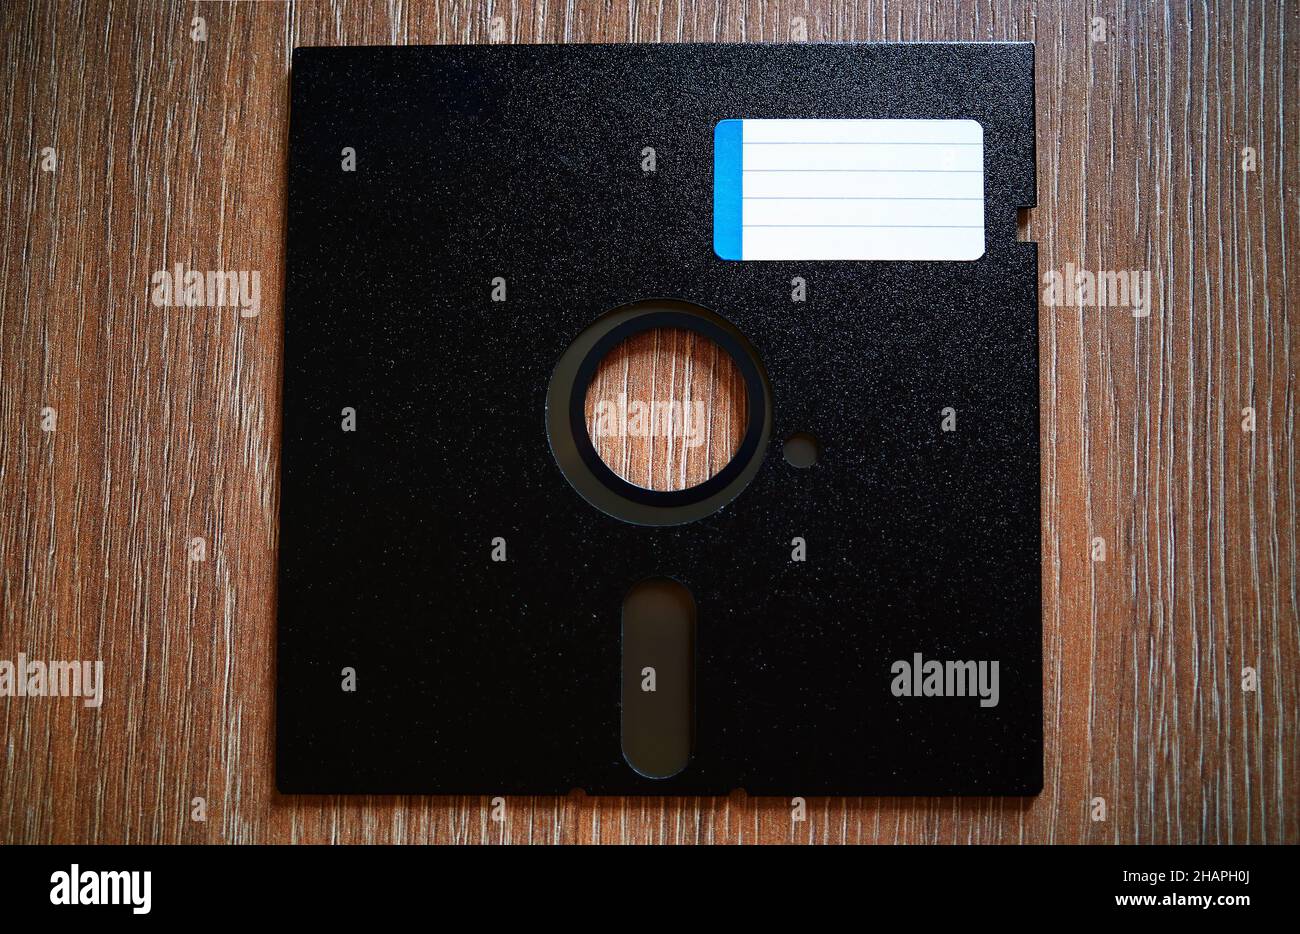 Floppy disc 5.25 with blue label background Stock Photo